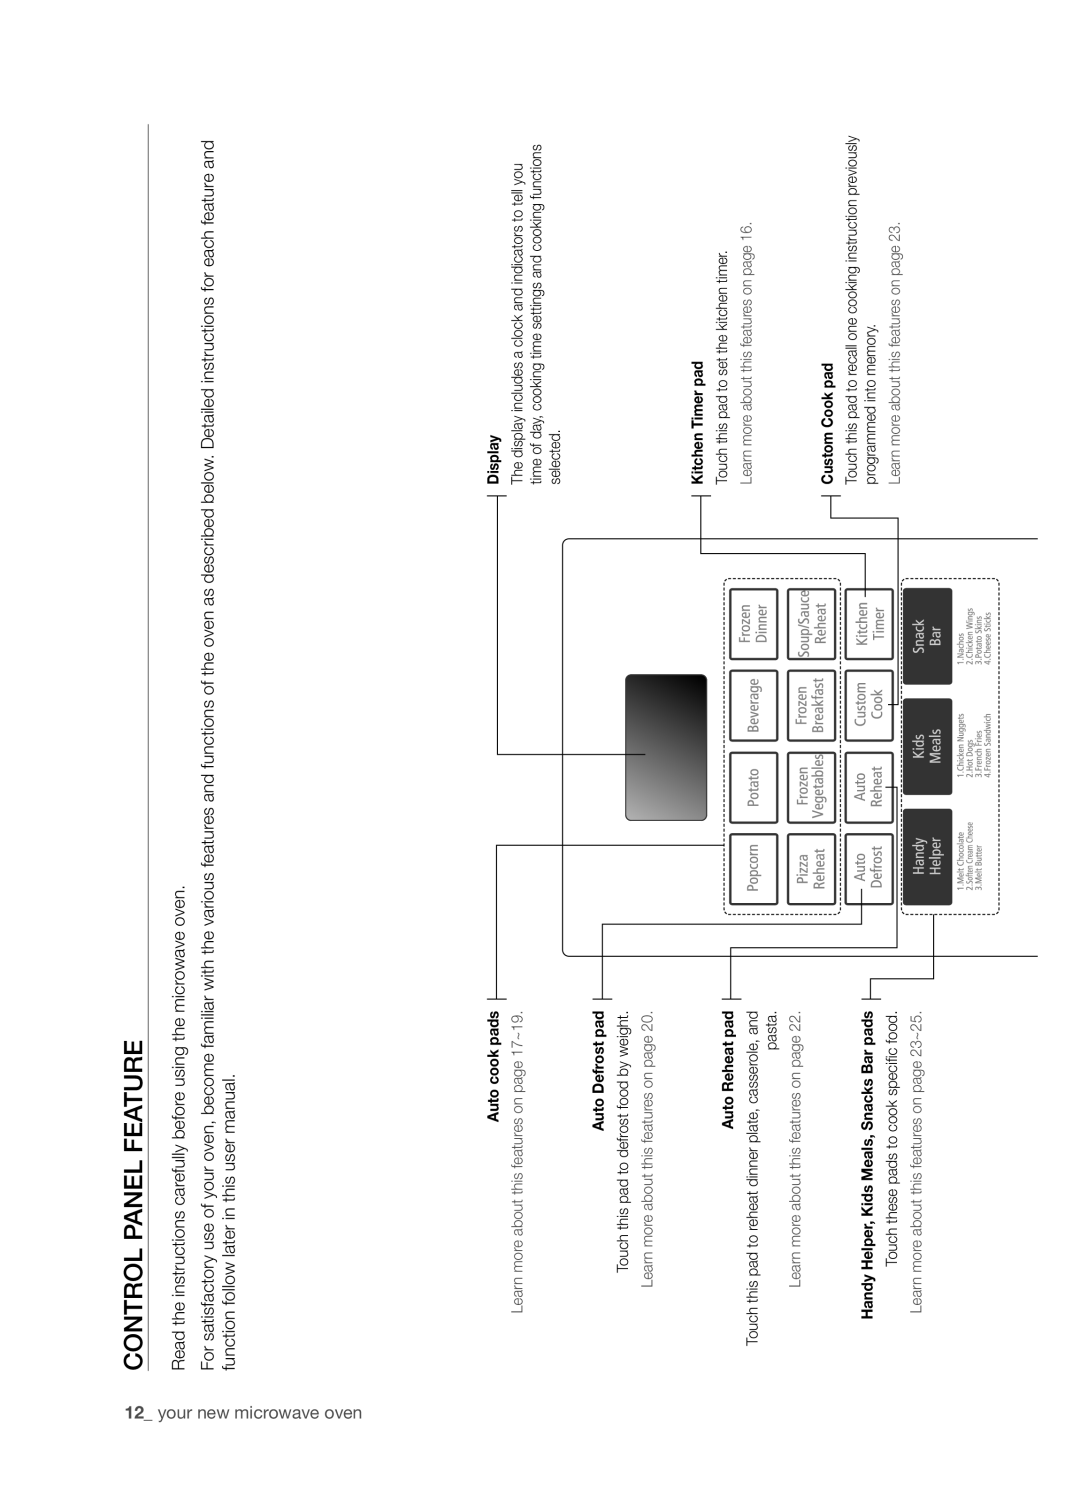 Samsung SMH6165 user manual Control panel feature, your new microwave oven 